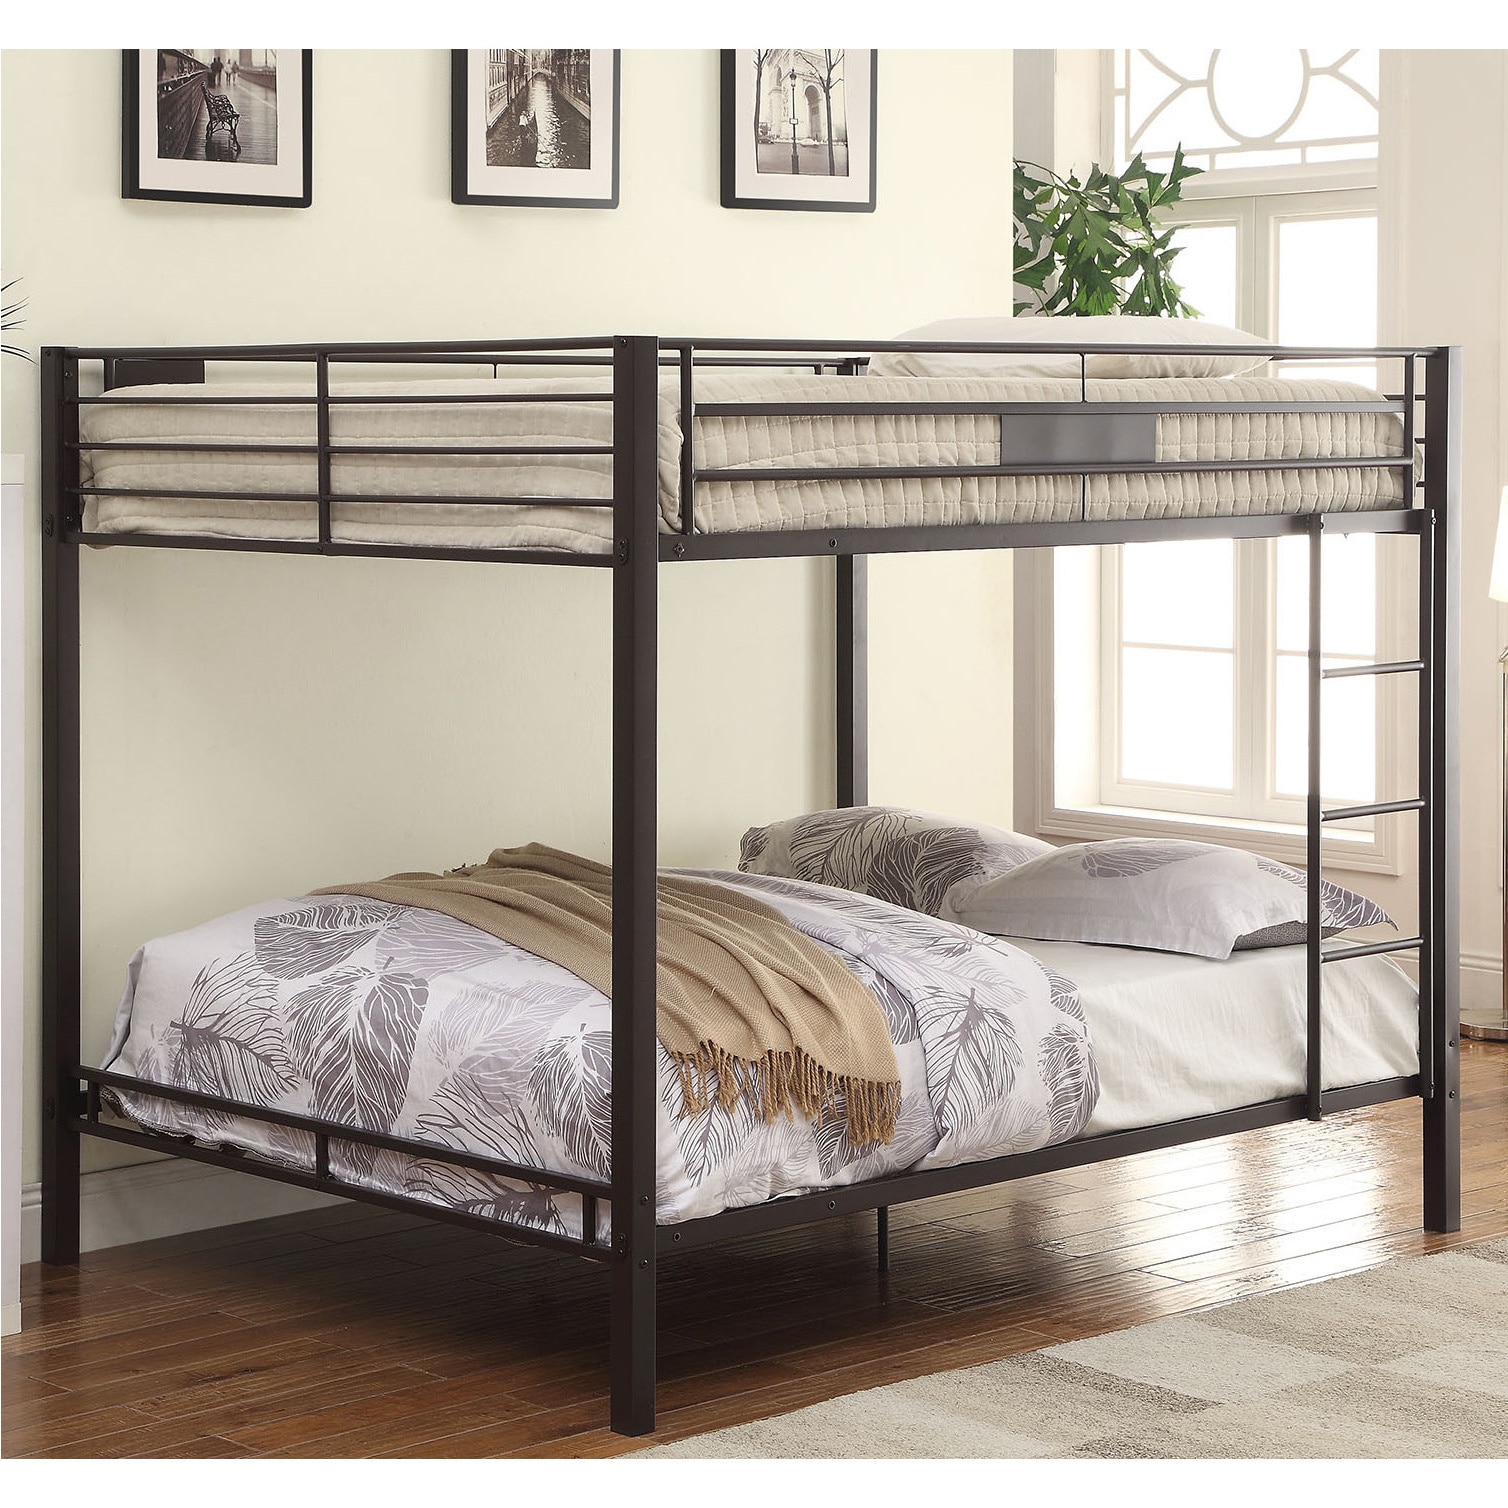 the bunk bed